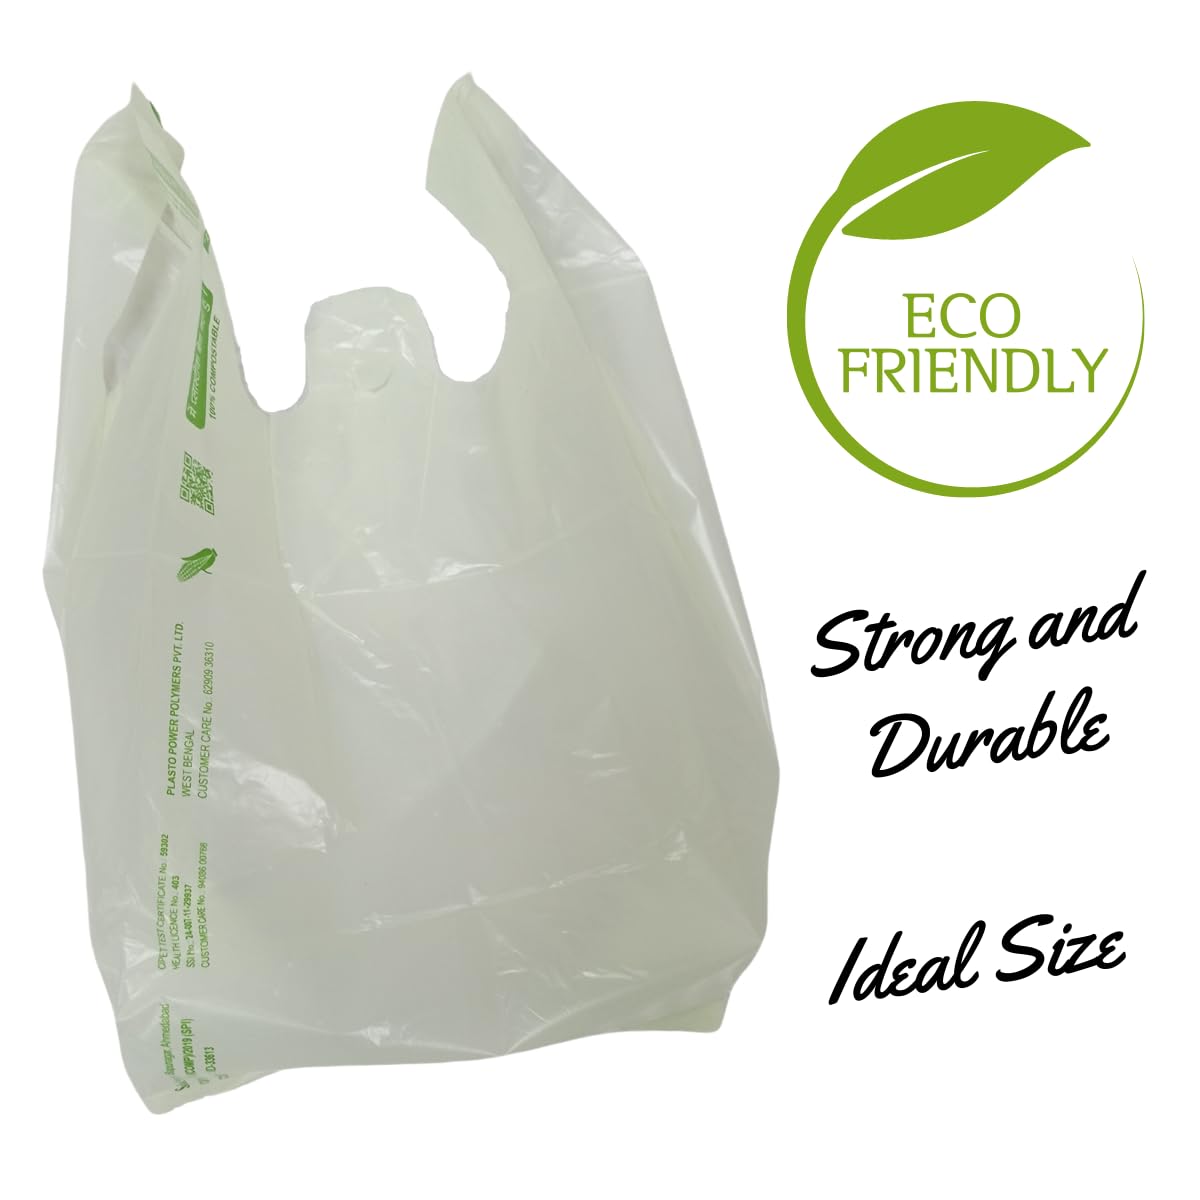 SINGHAL 100% Compostable/Biodegradable Shopping Bag Carry Bags holding weight upto 3 kg PACK OF 100 Bags (16x20 Inch)